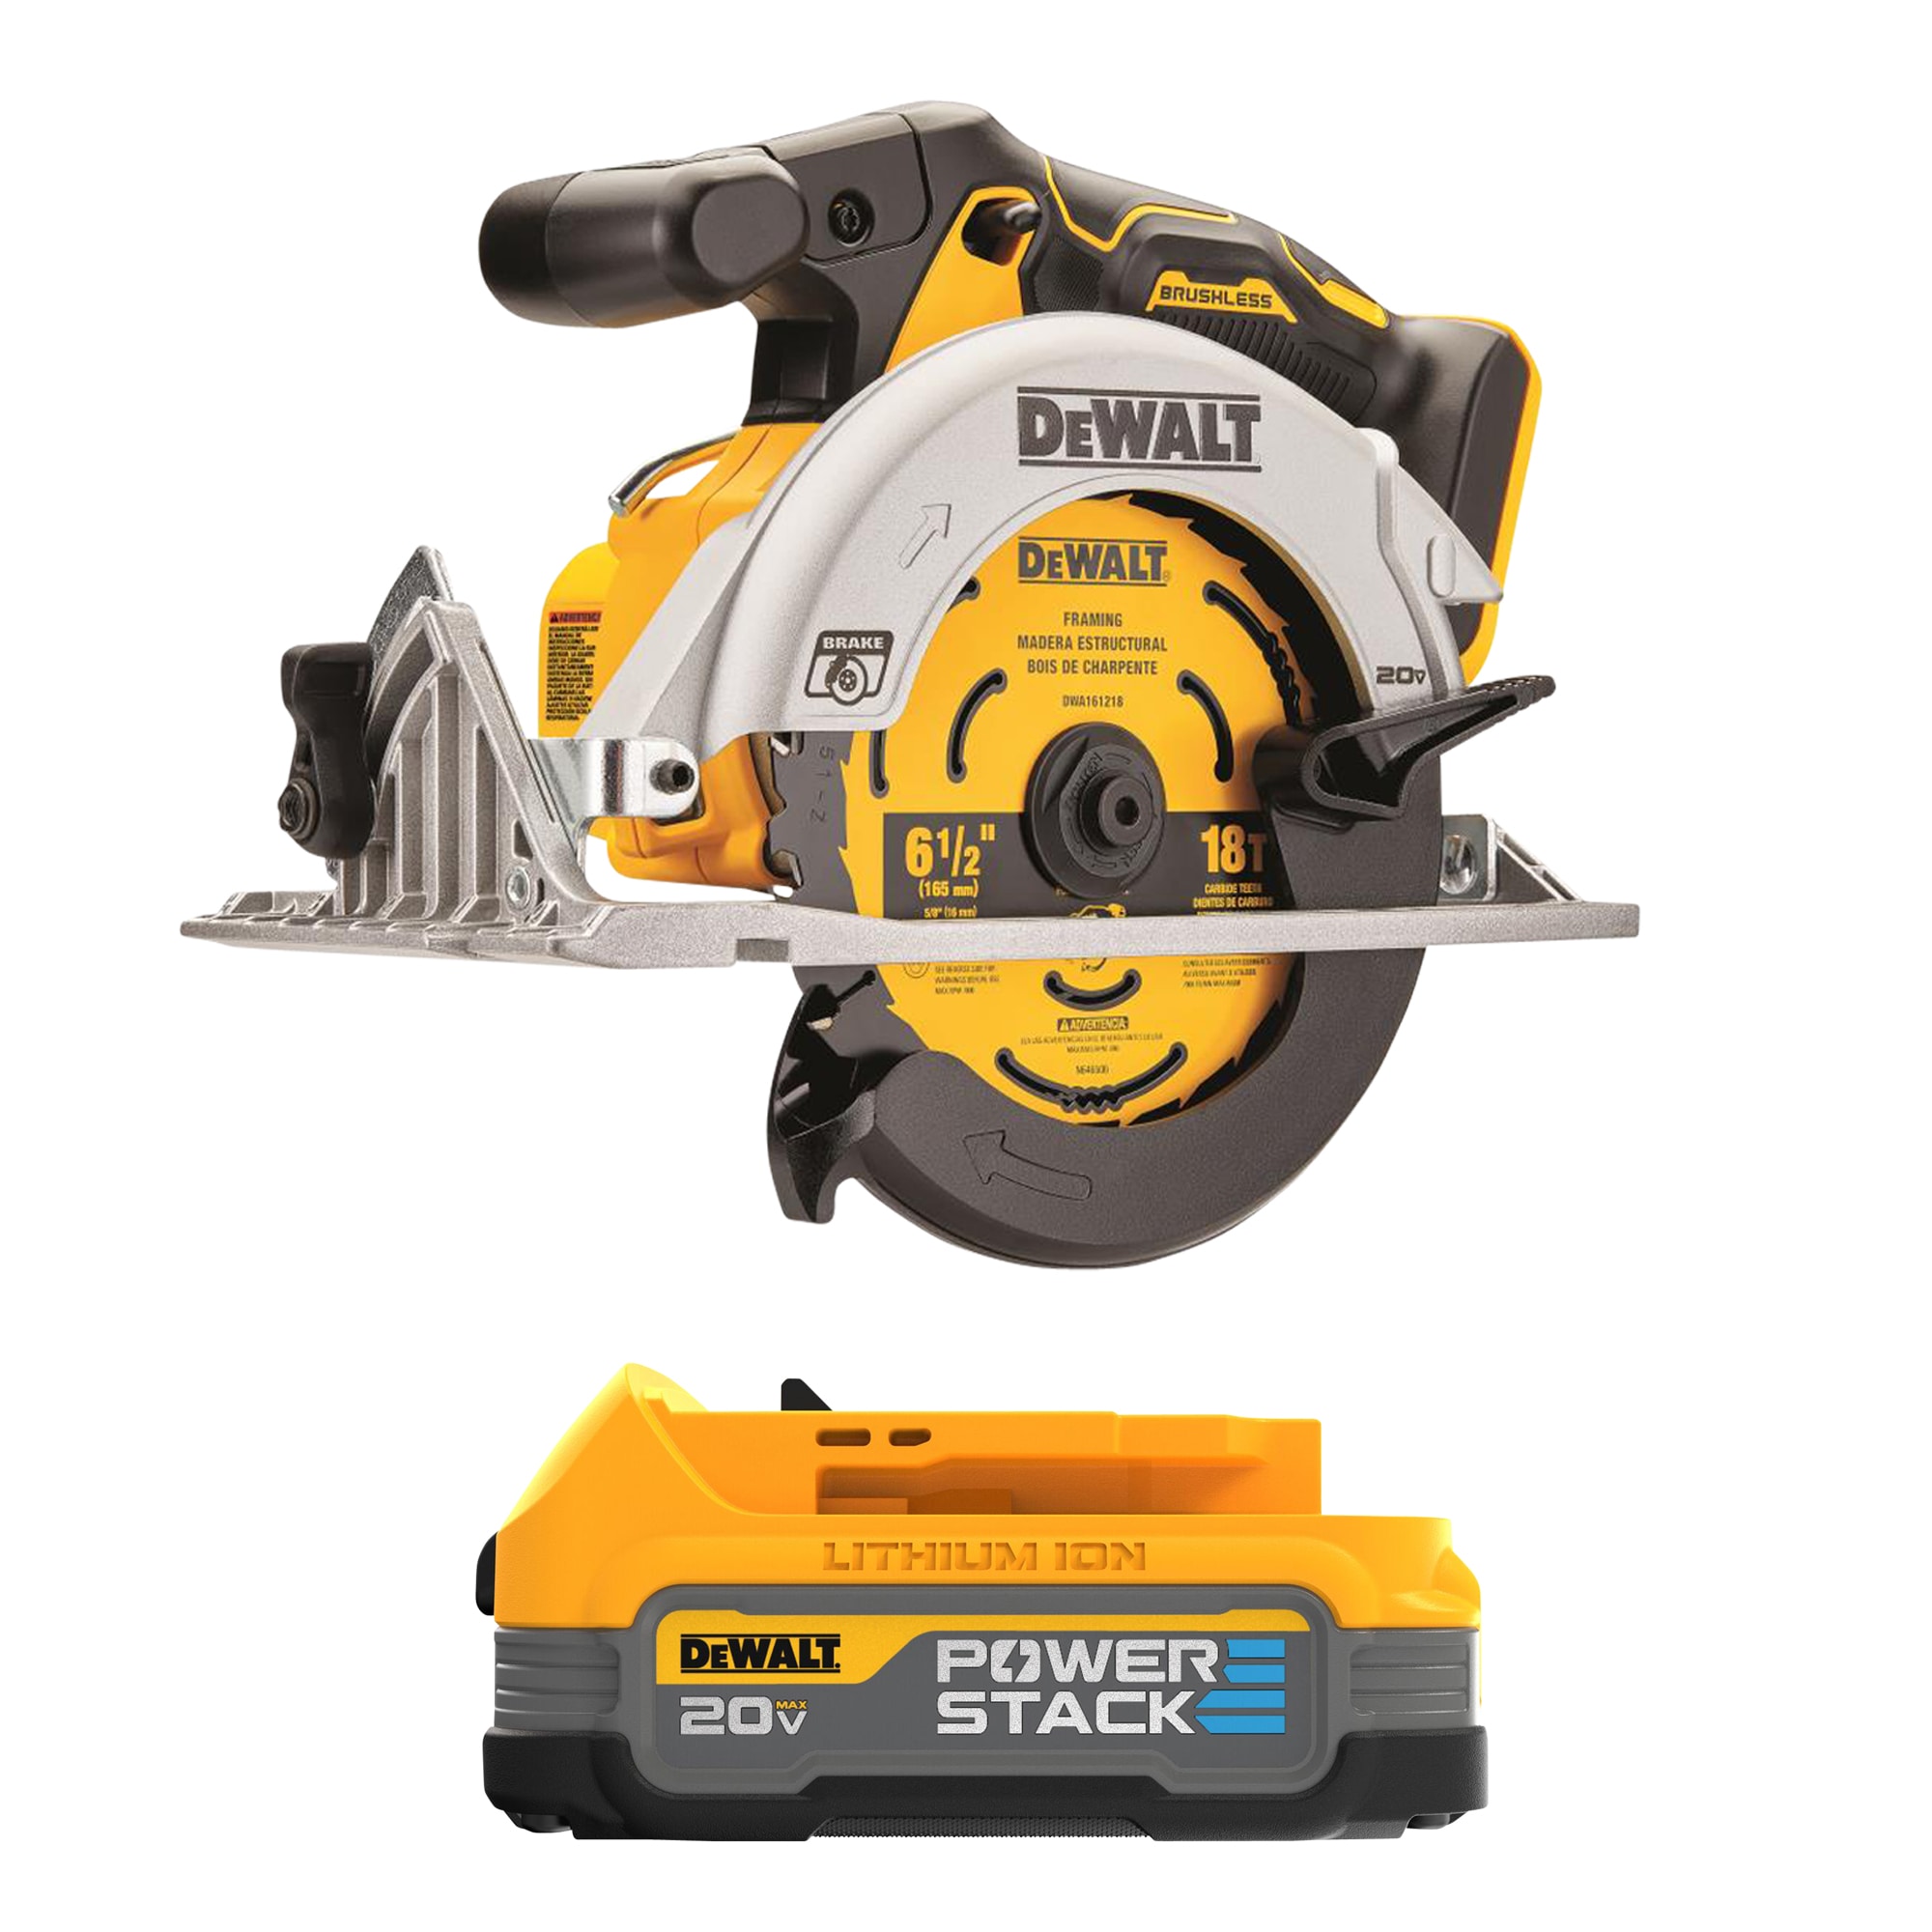 DEWALT 20-Volt Max 6-1/2-in Cordless Circular Saw & 20V MAX Starter Kit with POWERSTACK Compact Battery and Charger